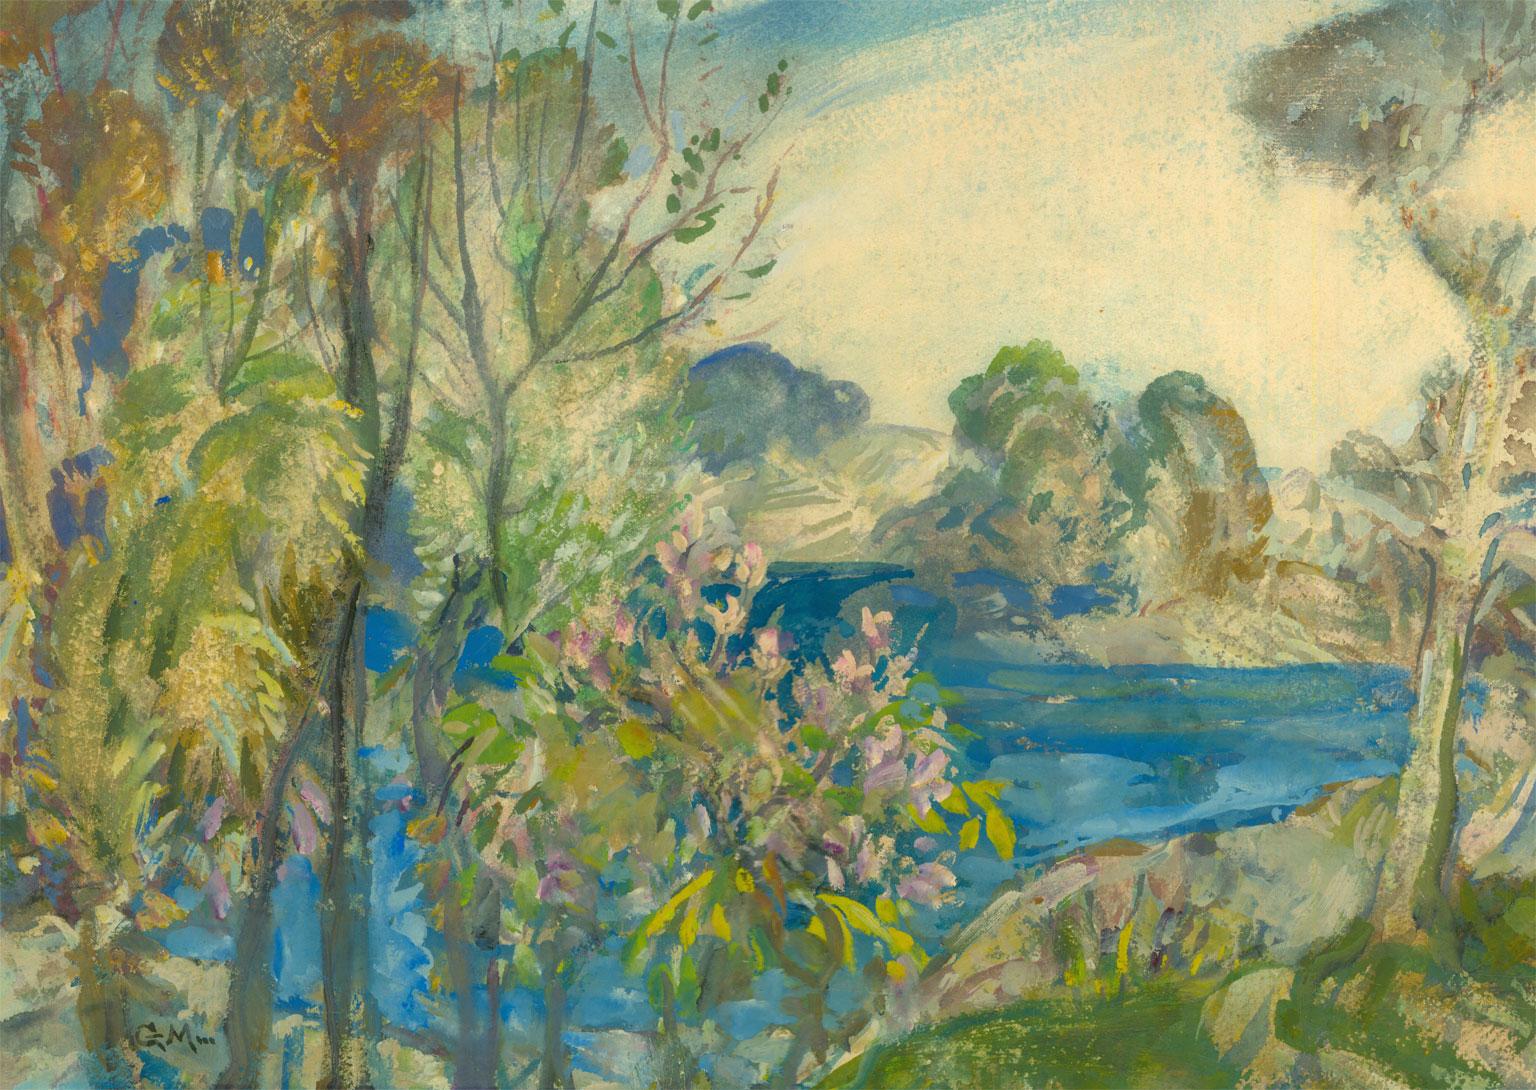 A fine impressionist watercolour landscape, from English artist Gerald Edward Moira (1867-1959). Moira became best known for his murals, however his watercolour landscapes and oil paintings are collected by both the public and private sectors. This